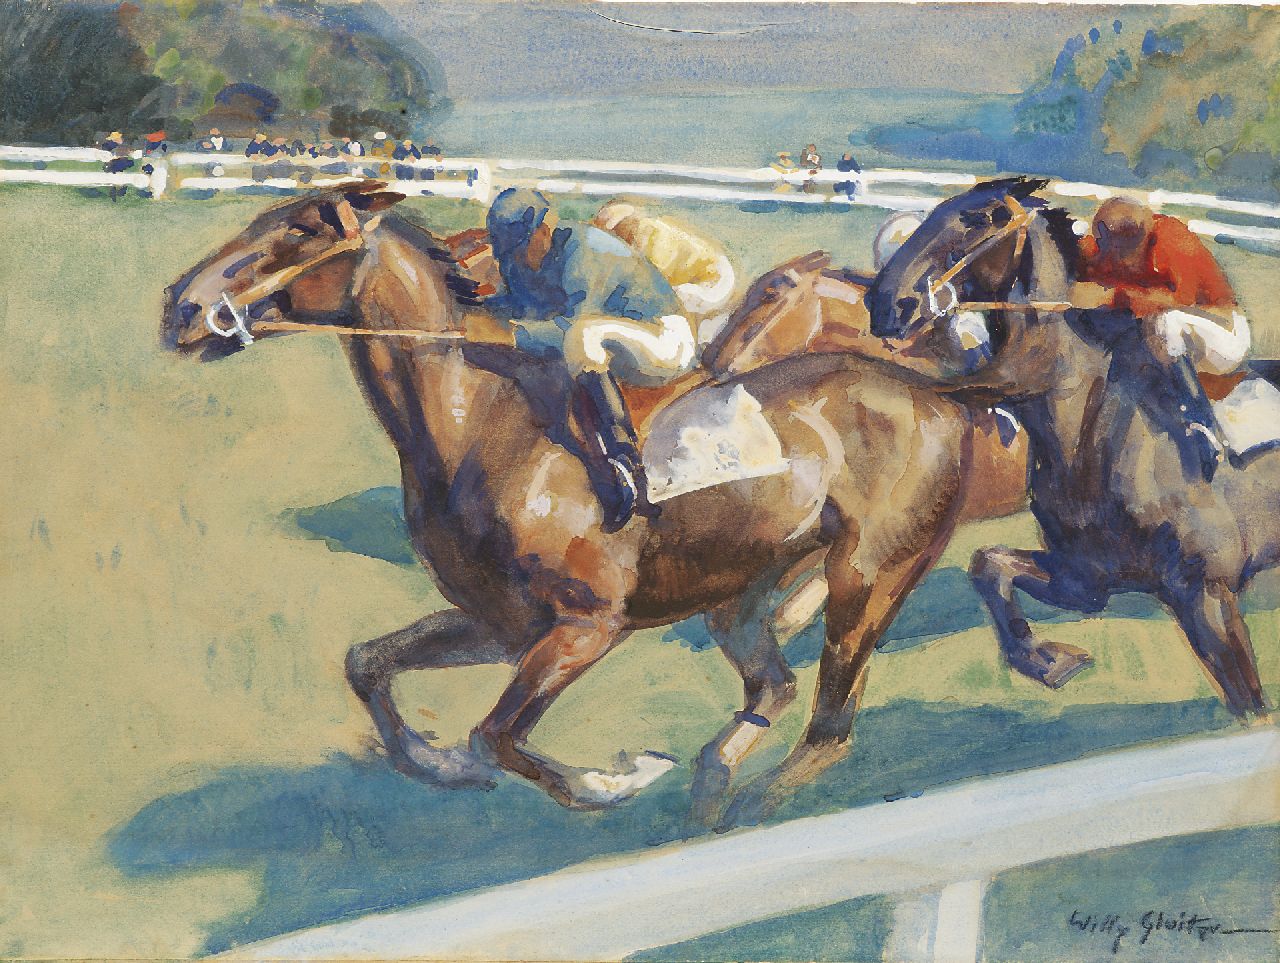 Sluiter J.W.  | Jan Willem 'Willy' Sluiter, The horserace, watercolour and gouache on paper 48.4 x 64.7 cm, signed l.r.